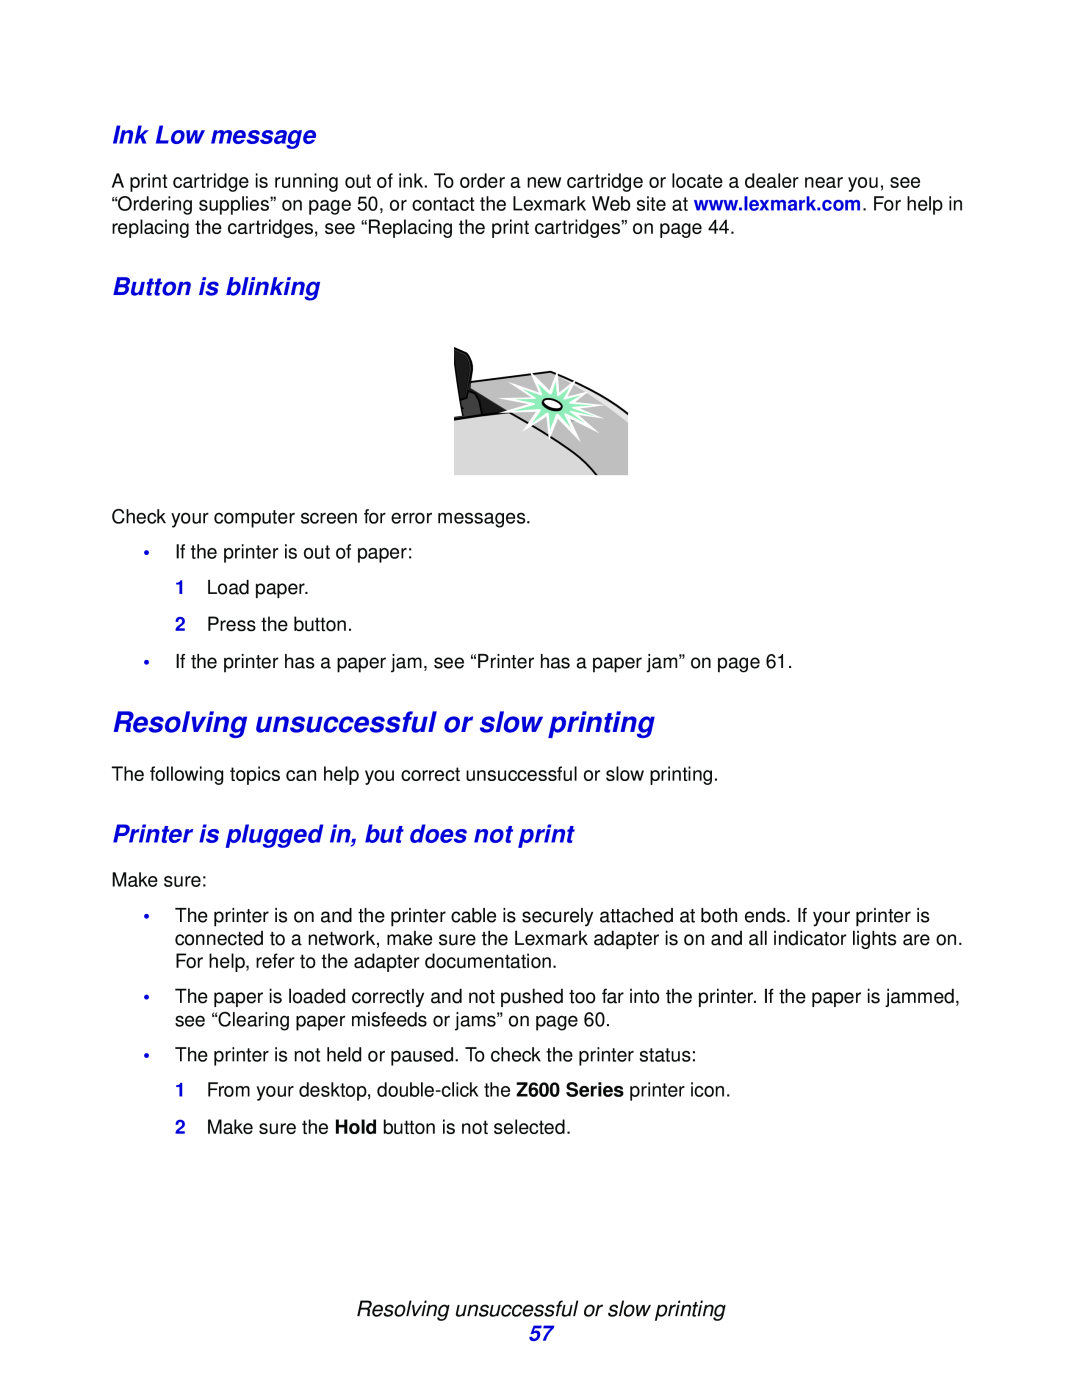 Lexmark Z600 Series manual Resolving unsuccessful or slow printing, Ink Low message, Button is blinking 